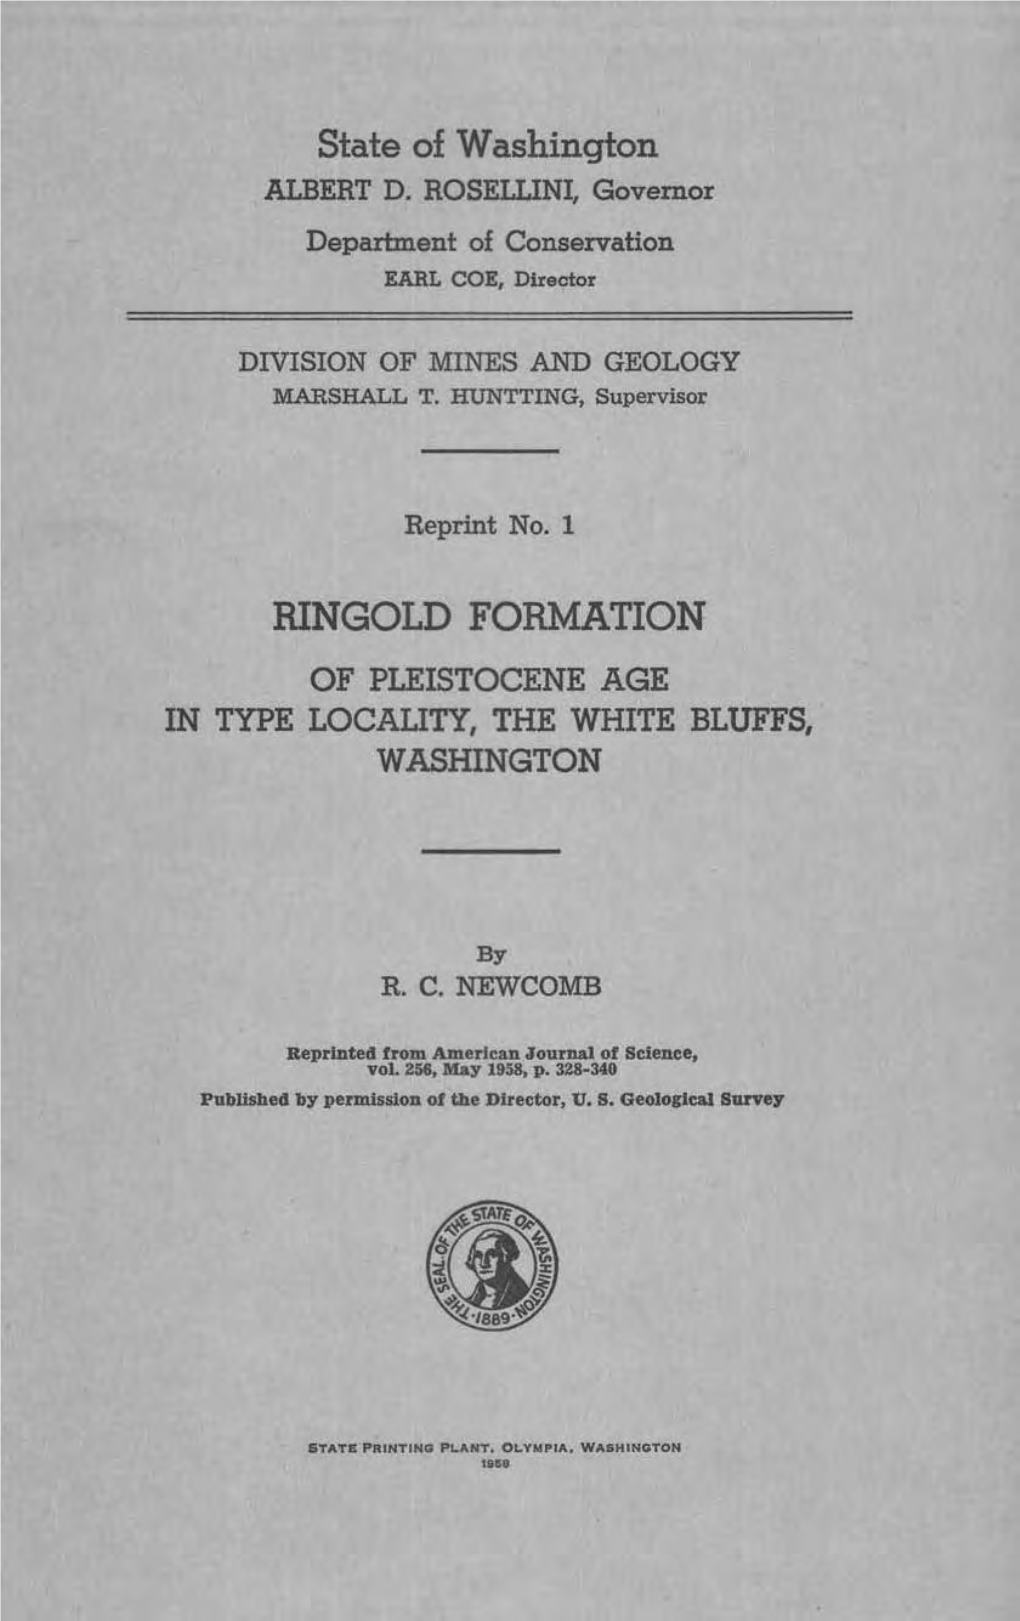 Reprint 1. Ringold Formation of Pleistocene Age in Type